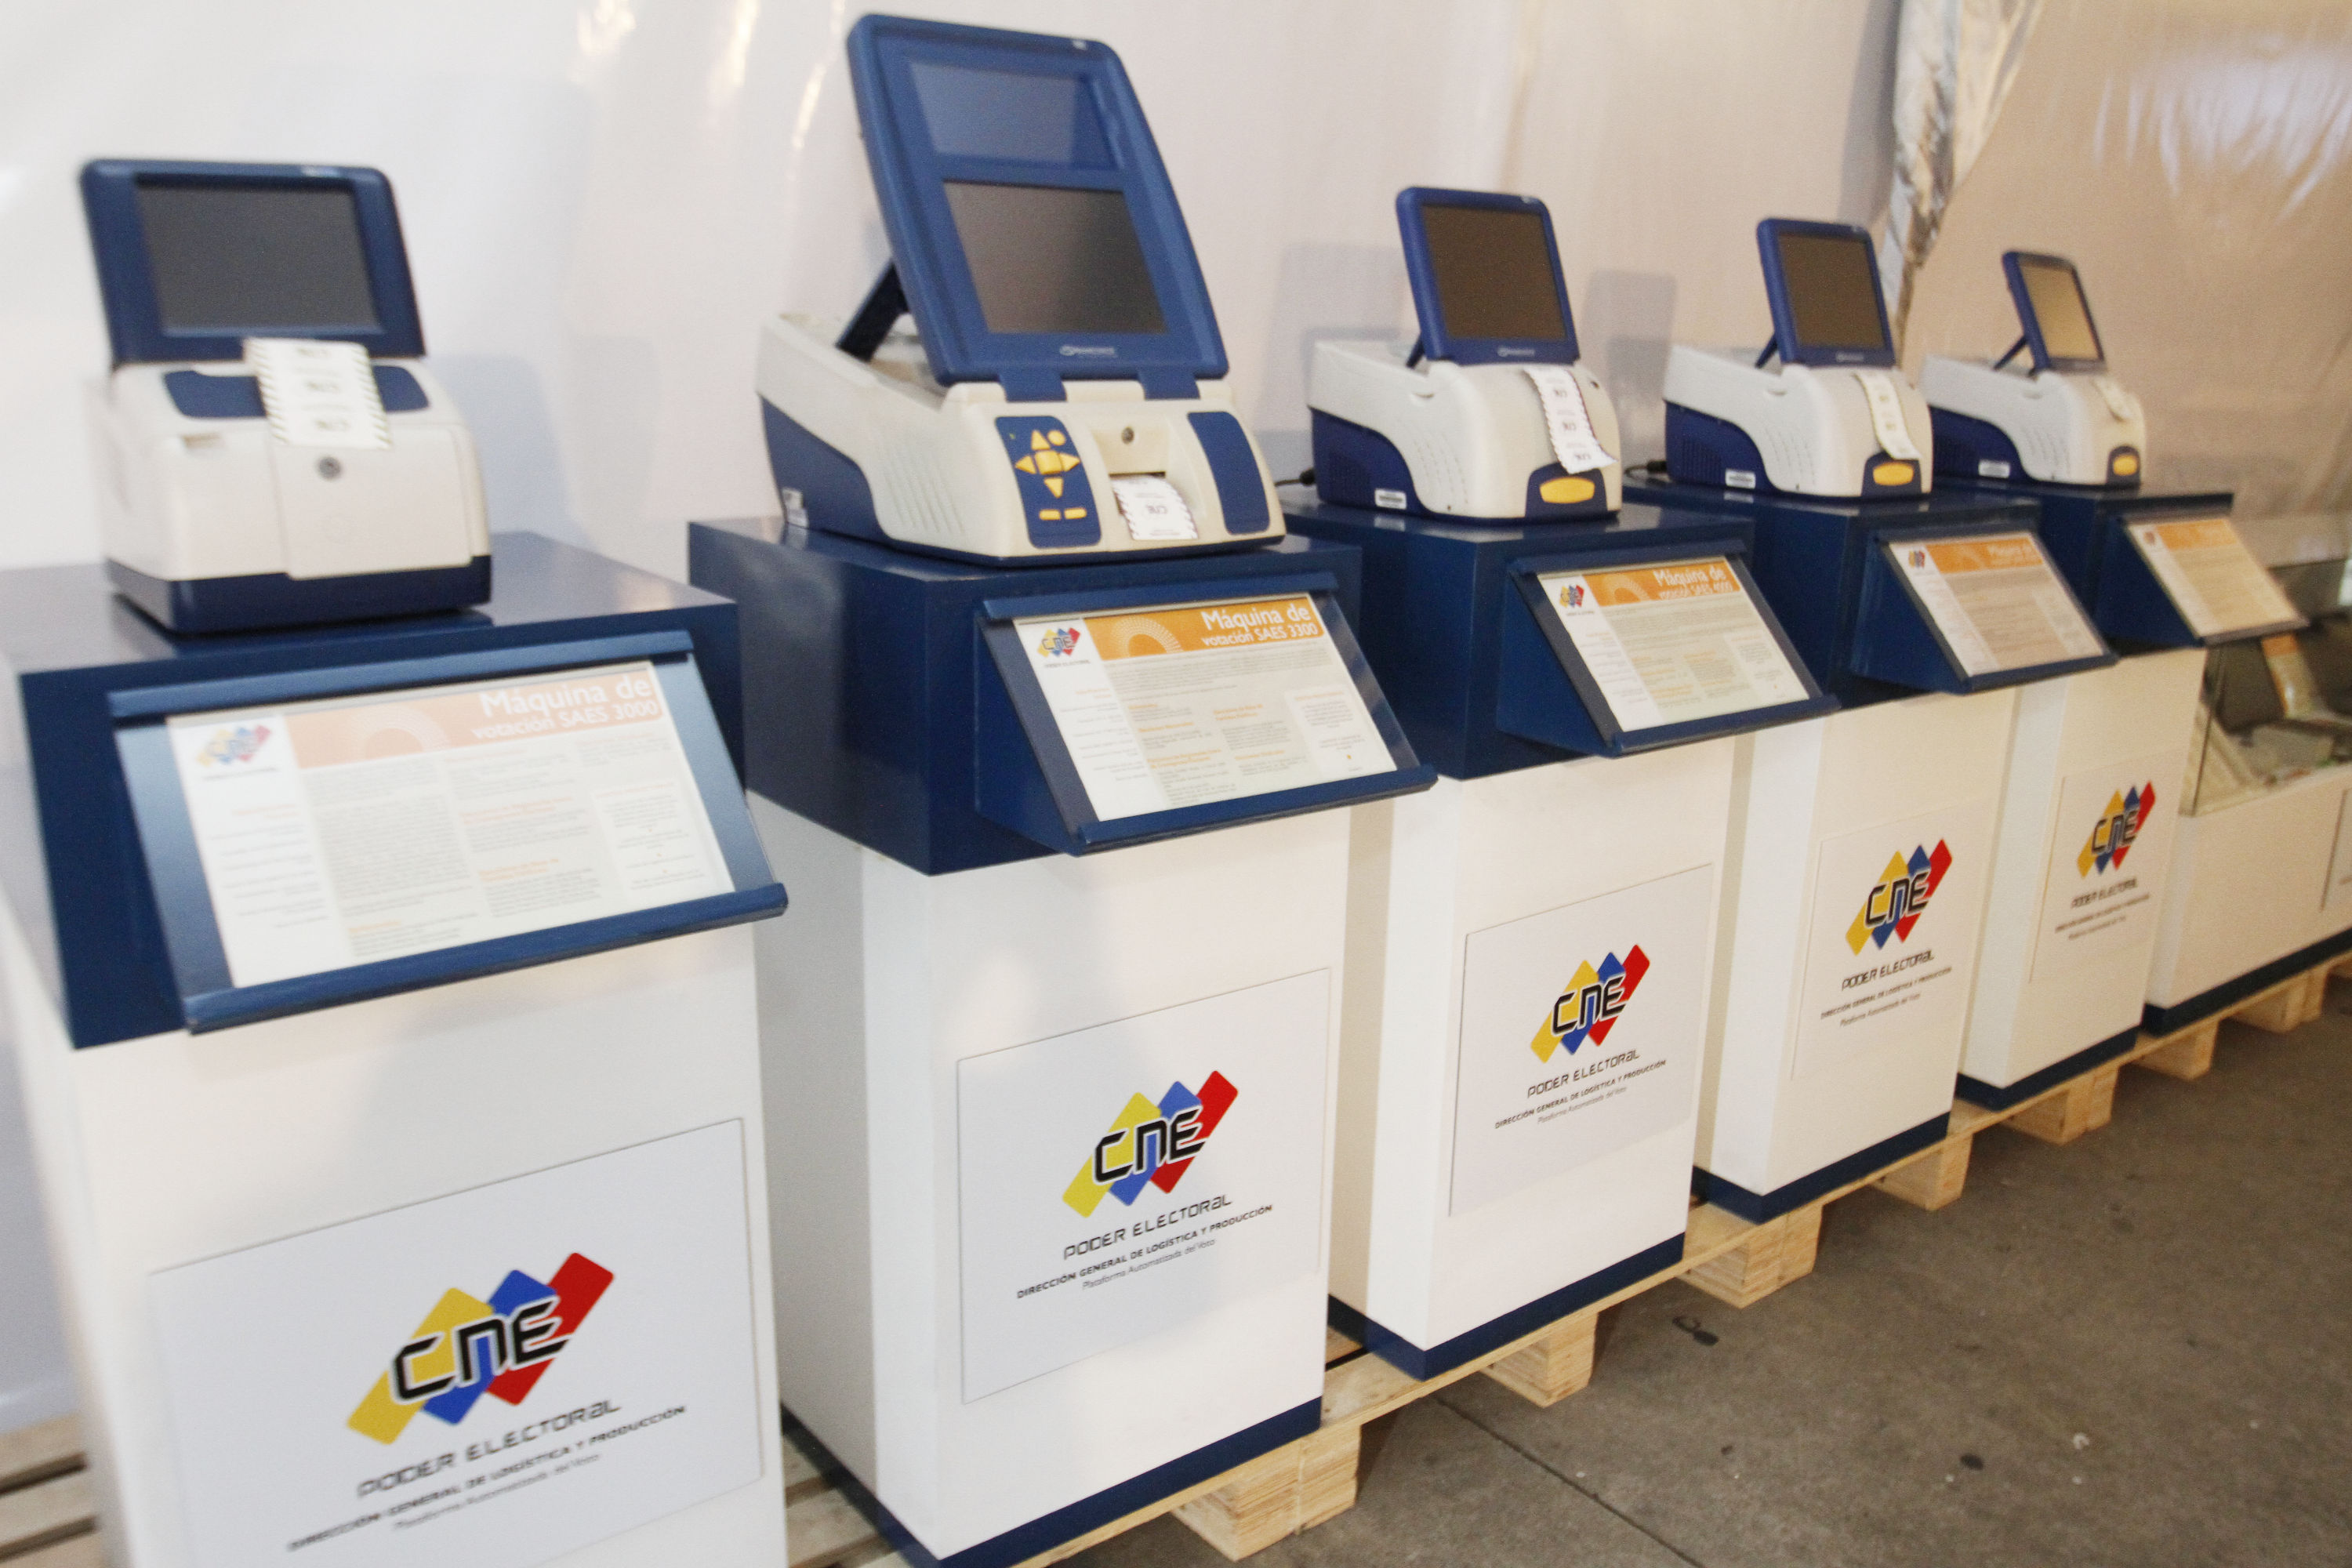 Voting systems. Smartmatic voting Machines. Vote Machine. Voting System. Smartmatic Electronic voting System.